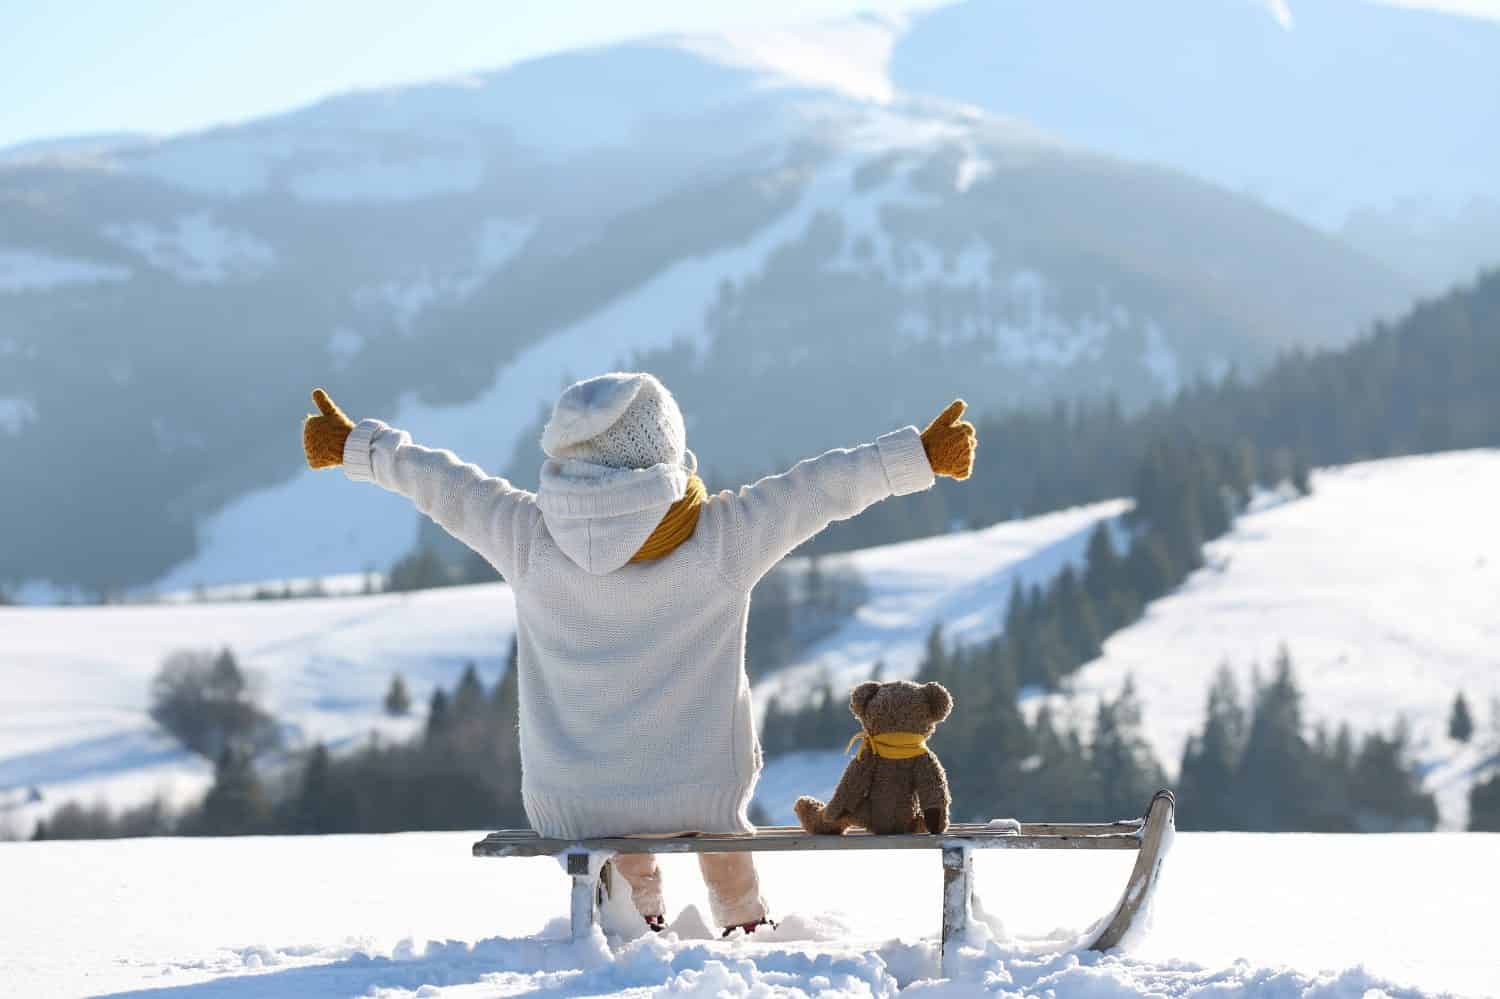 Сhild with toy teddy bear sits on a sled and looks at the winter snowy mountains.Winter family vacantion. Christmas celebration and winter holidays. Winter fun and outdoor activities with kids